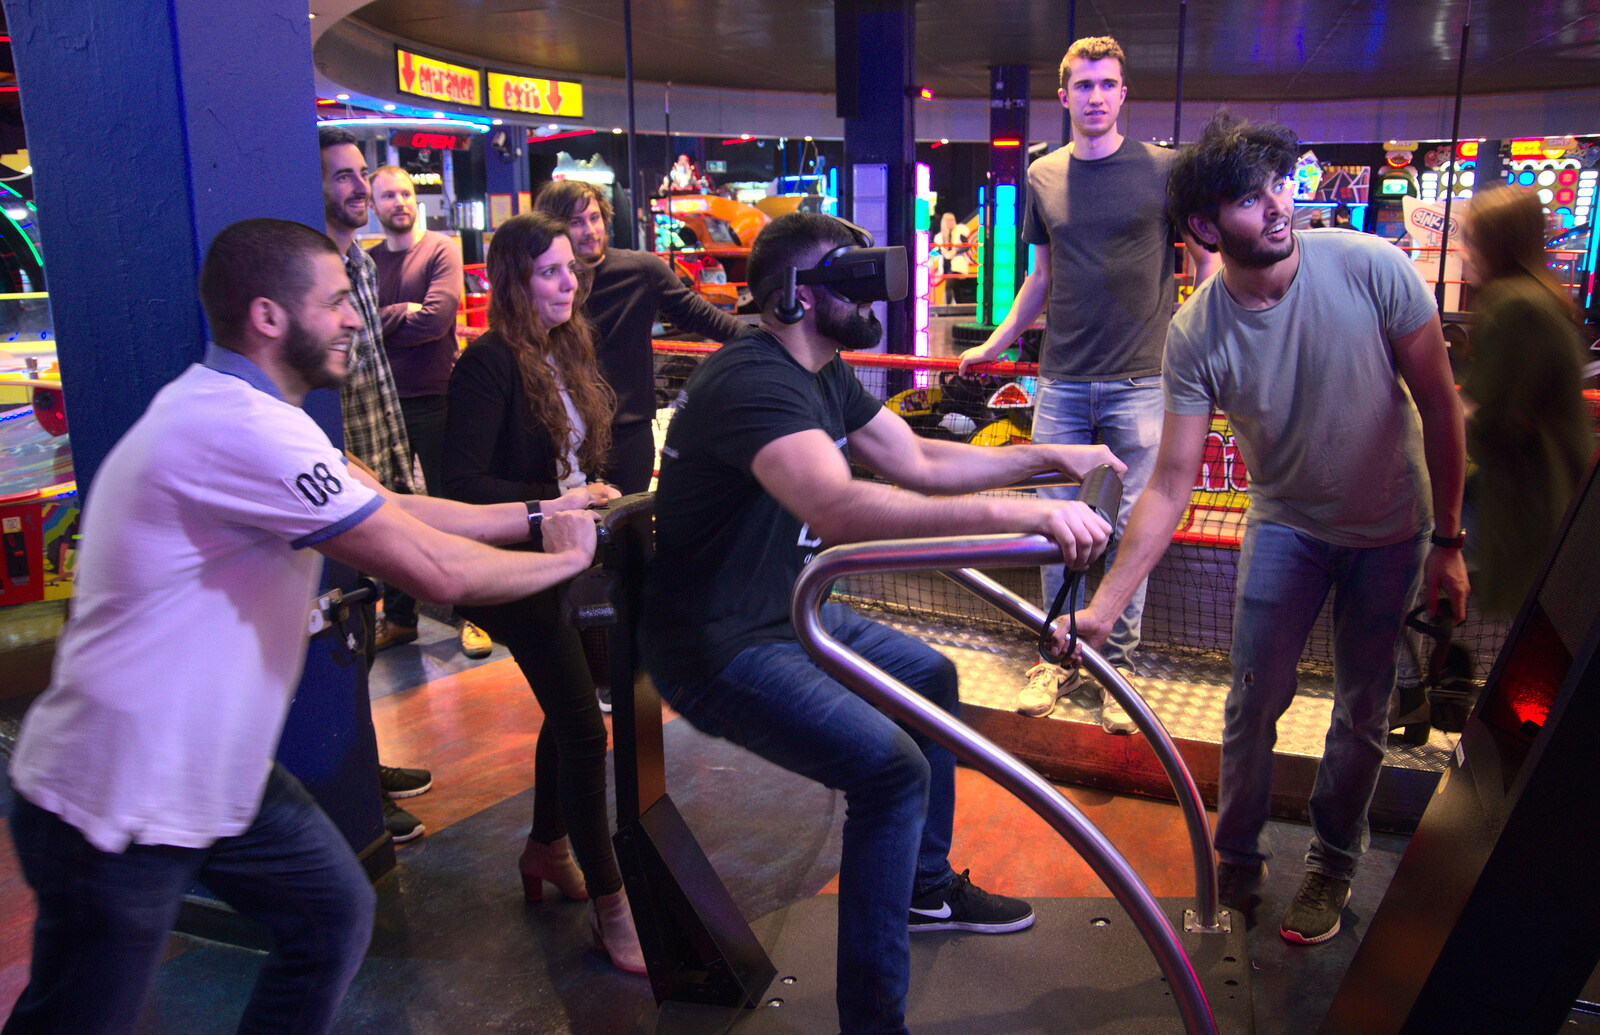 Tehmur is assisted on a VR game from A Team Outing at Namco Funscape, South Bank, London - 27th March 2019